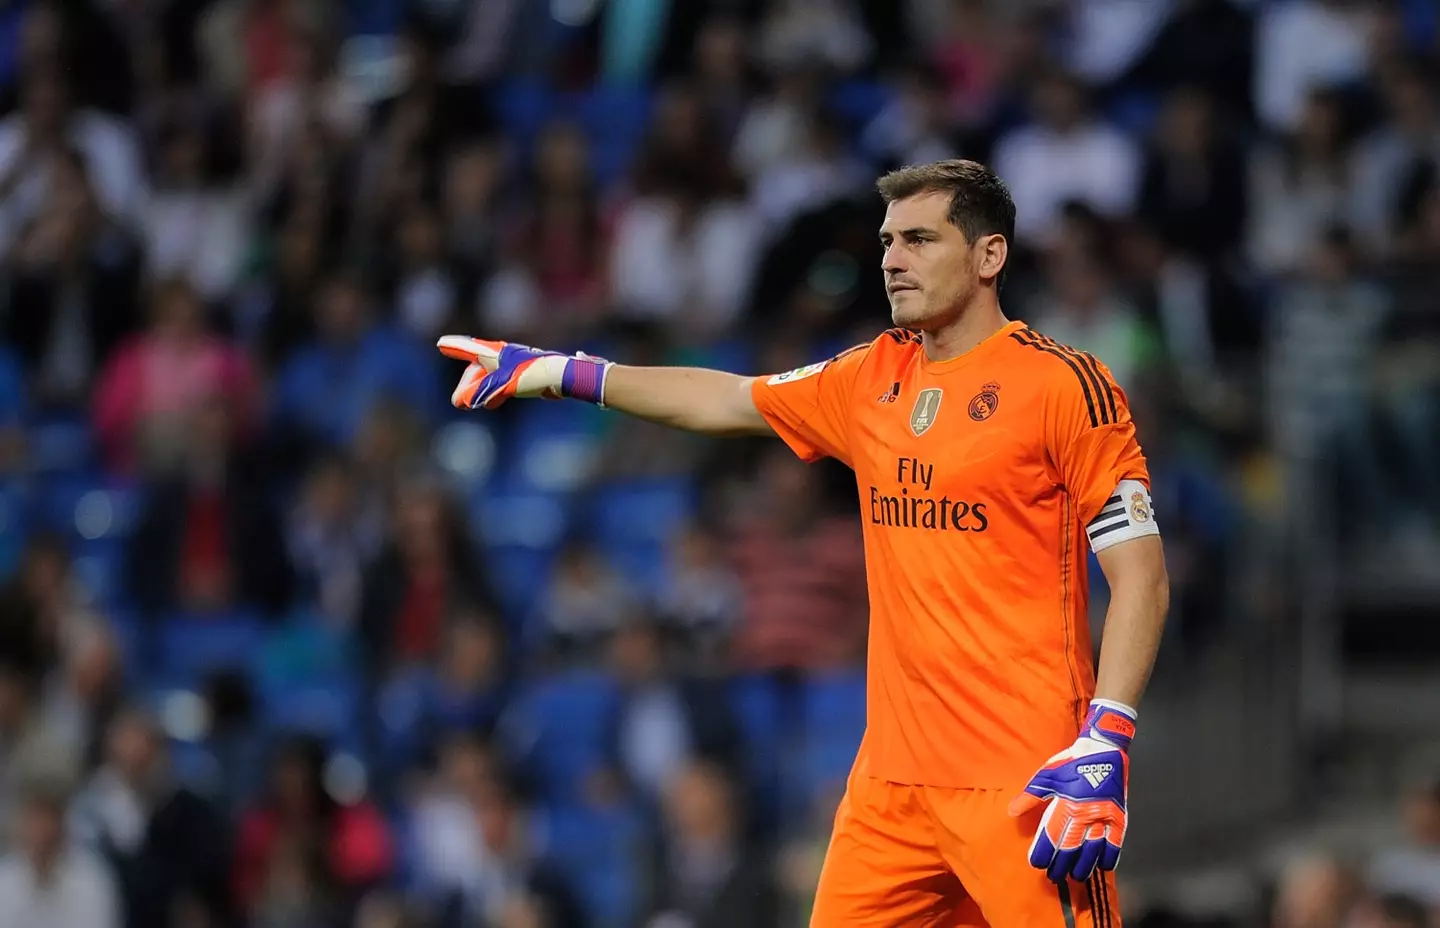 Iker Casillas in action for Real Madrid. Image: Getty 